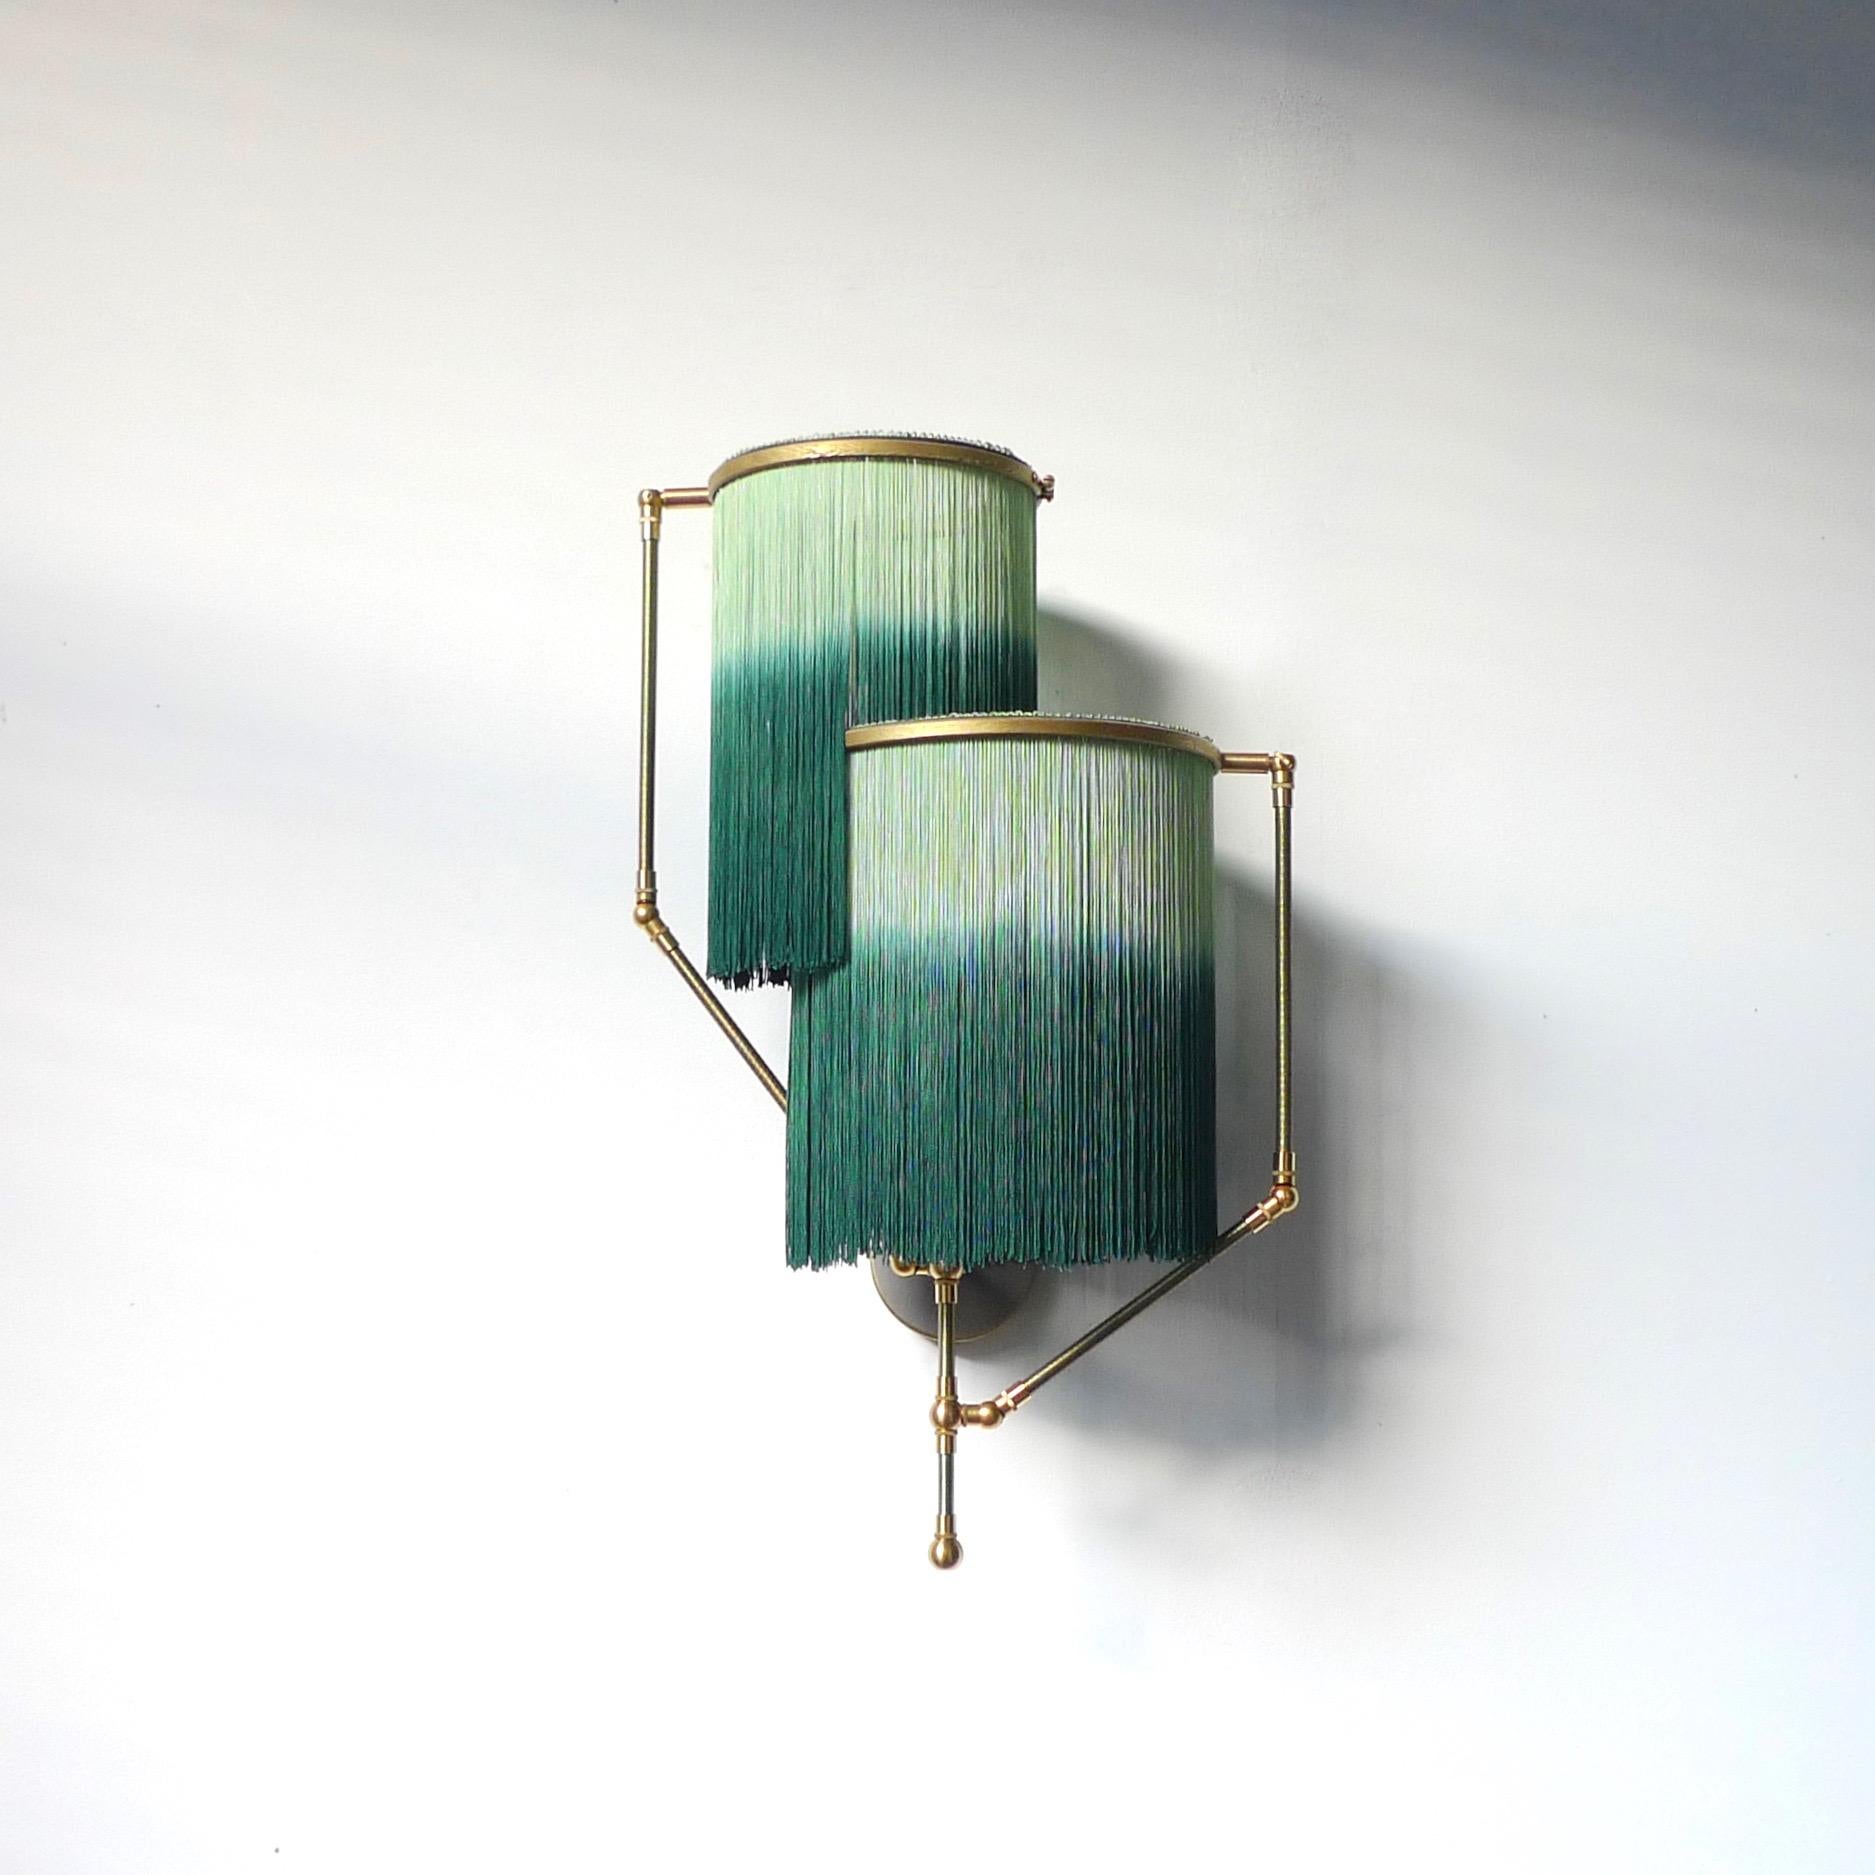 Green charme sconce lamp, Sander Bottinga.

Dimensions: 50 x W 38 x D 27 cm.
Handmade in brass, leather, wood and dip dyed colored Fringes in viscose.
The movable arms makes it possible to move the circles with fringes in different